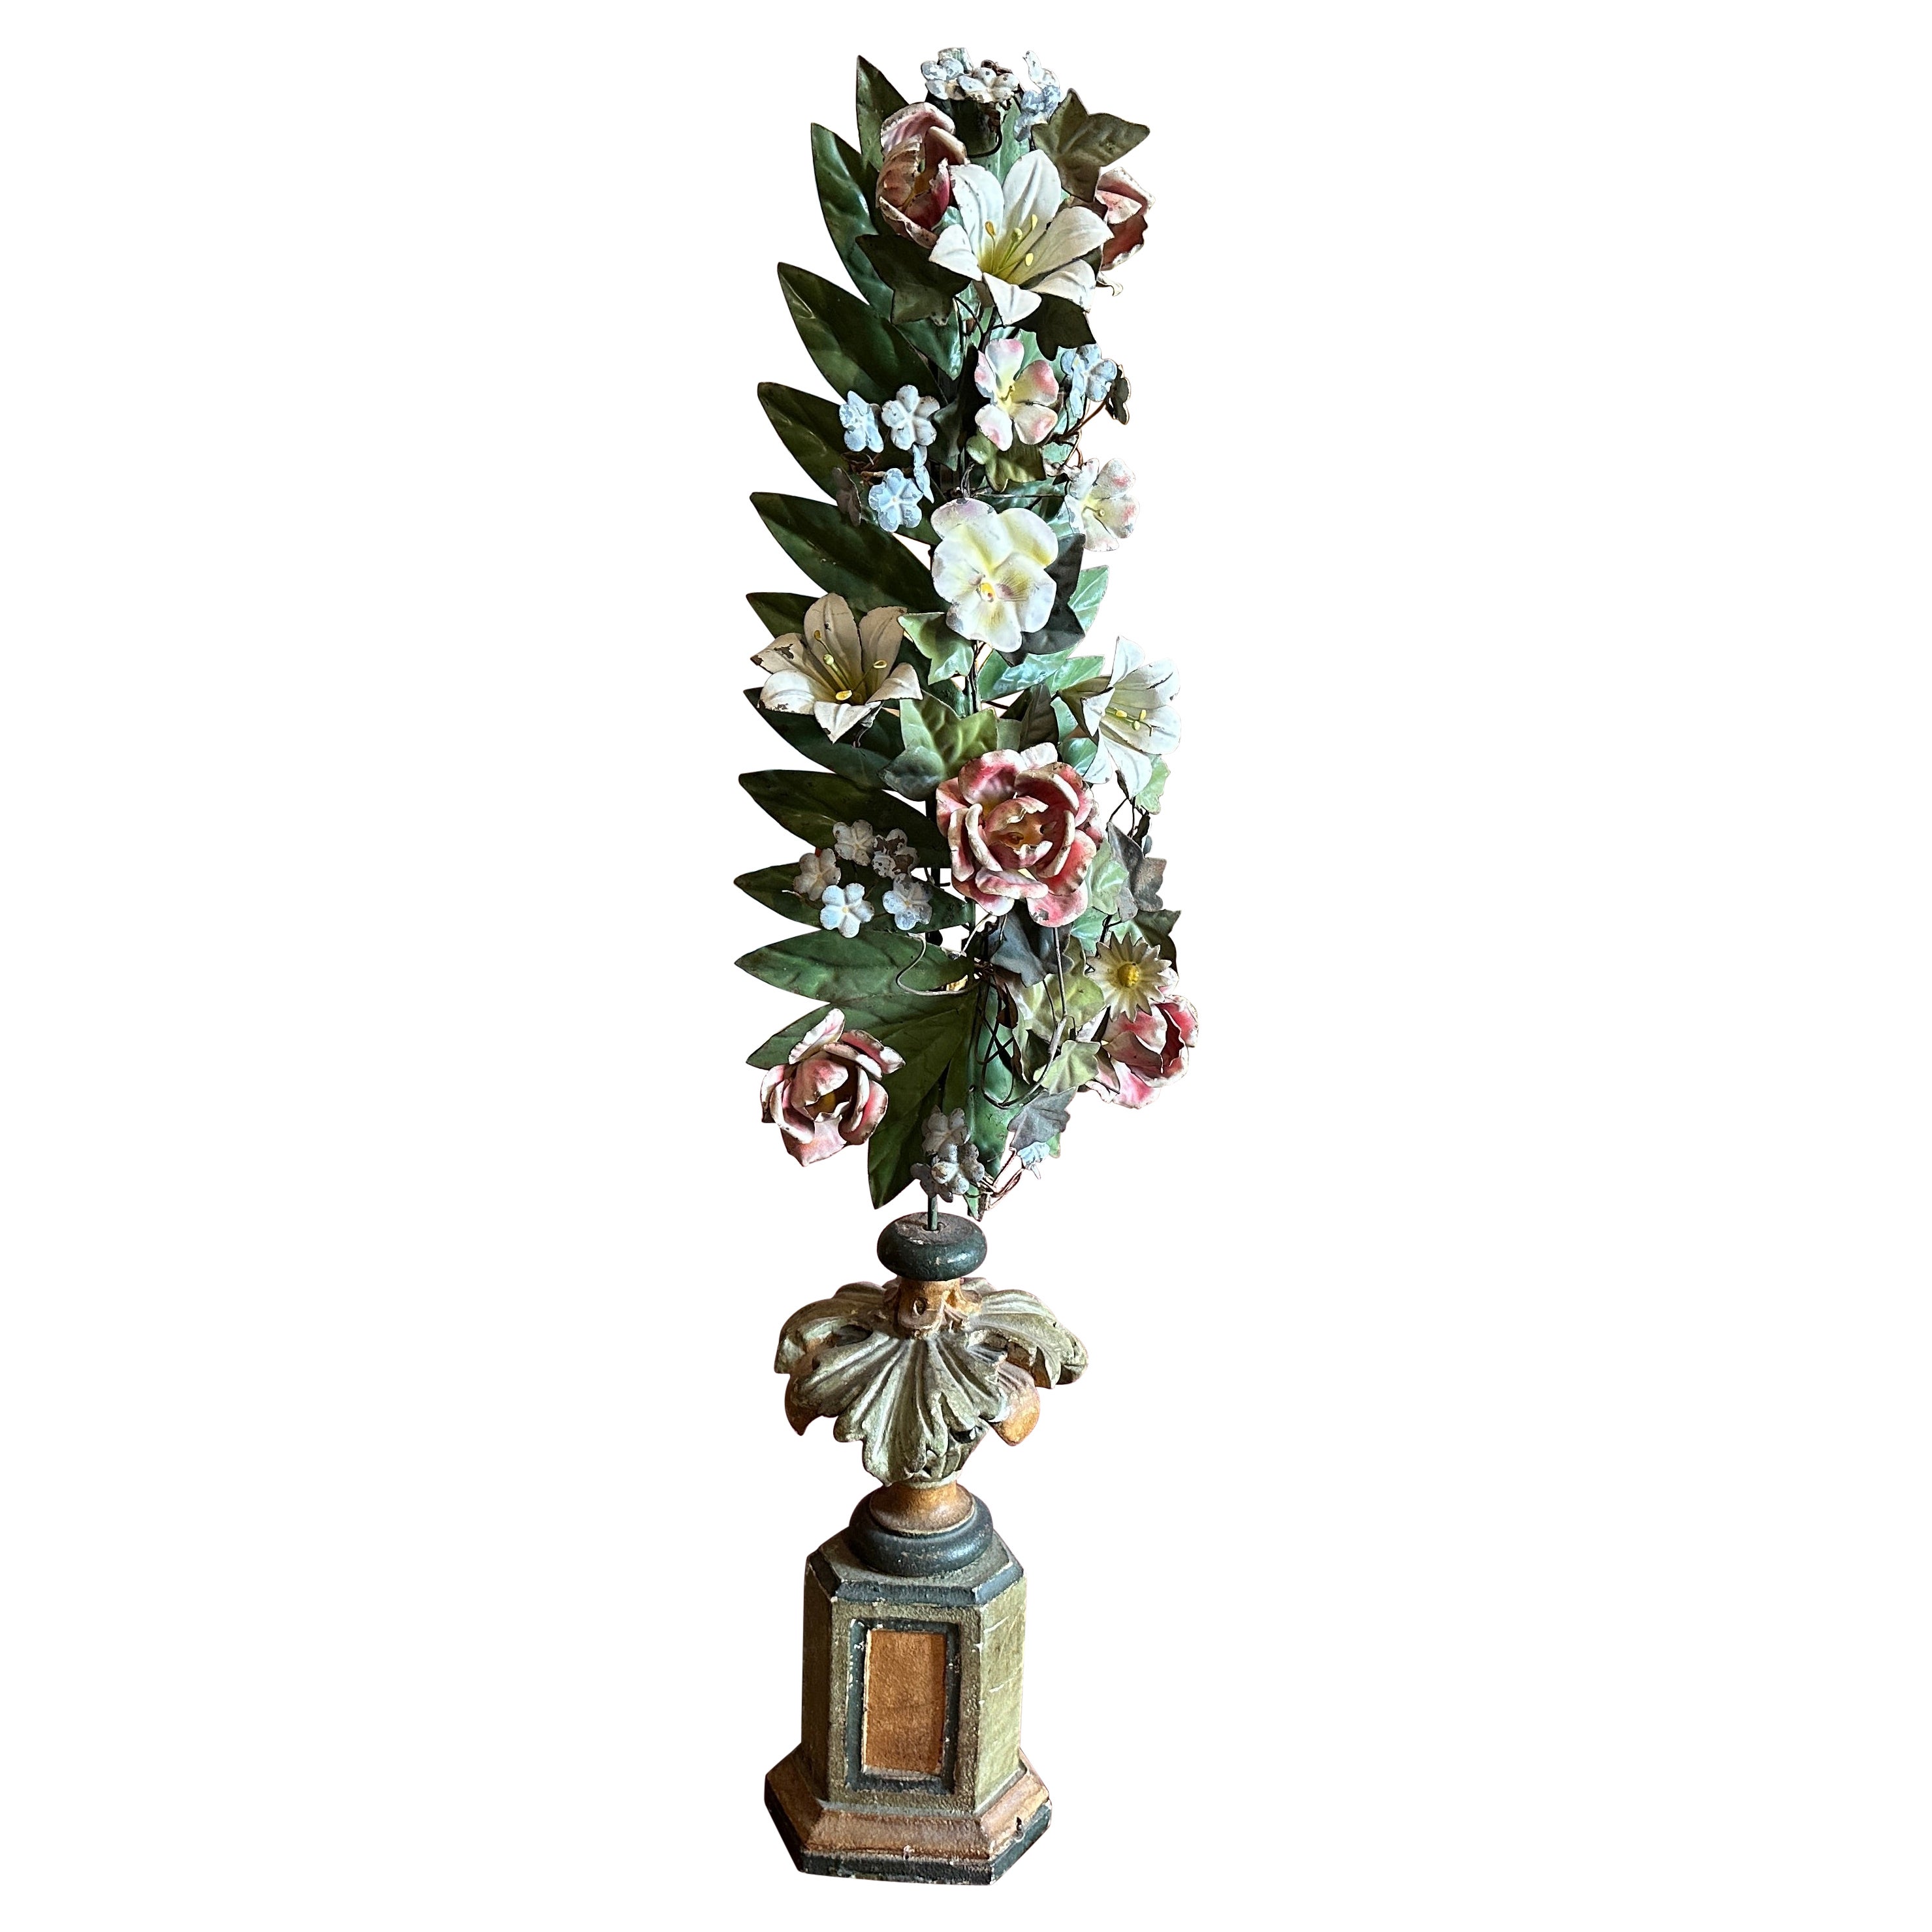 19th Century Lacquered Wood Palm Holder with Original Metal Floral Composition For Sale